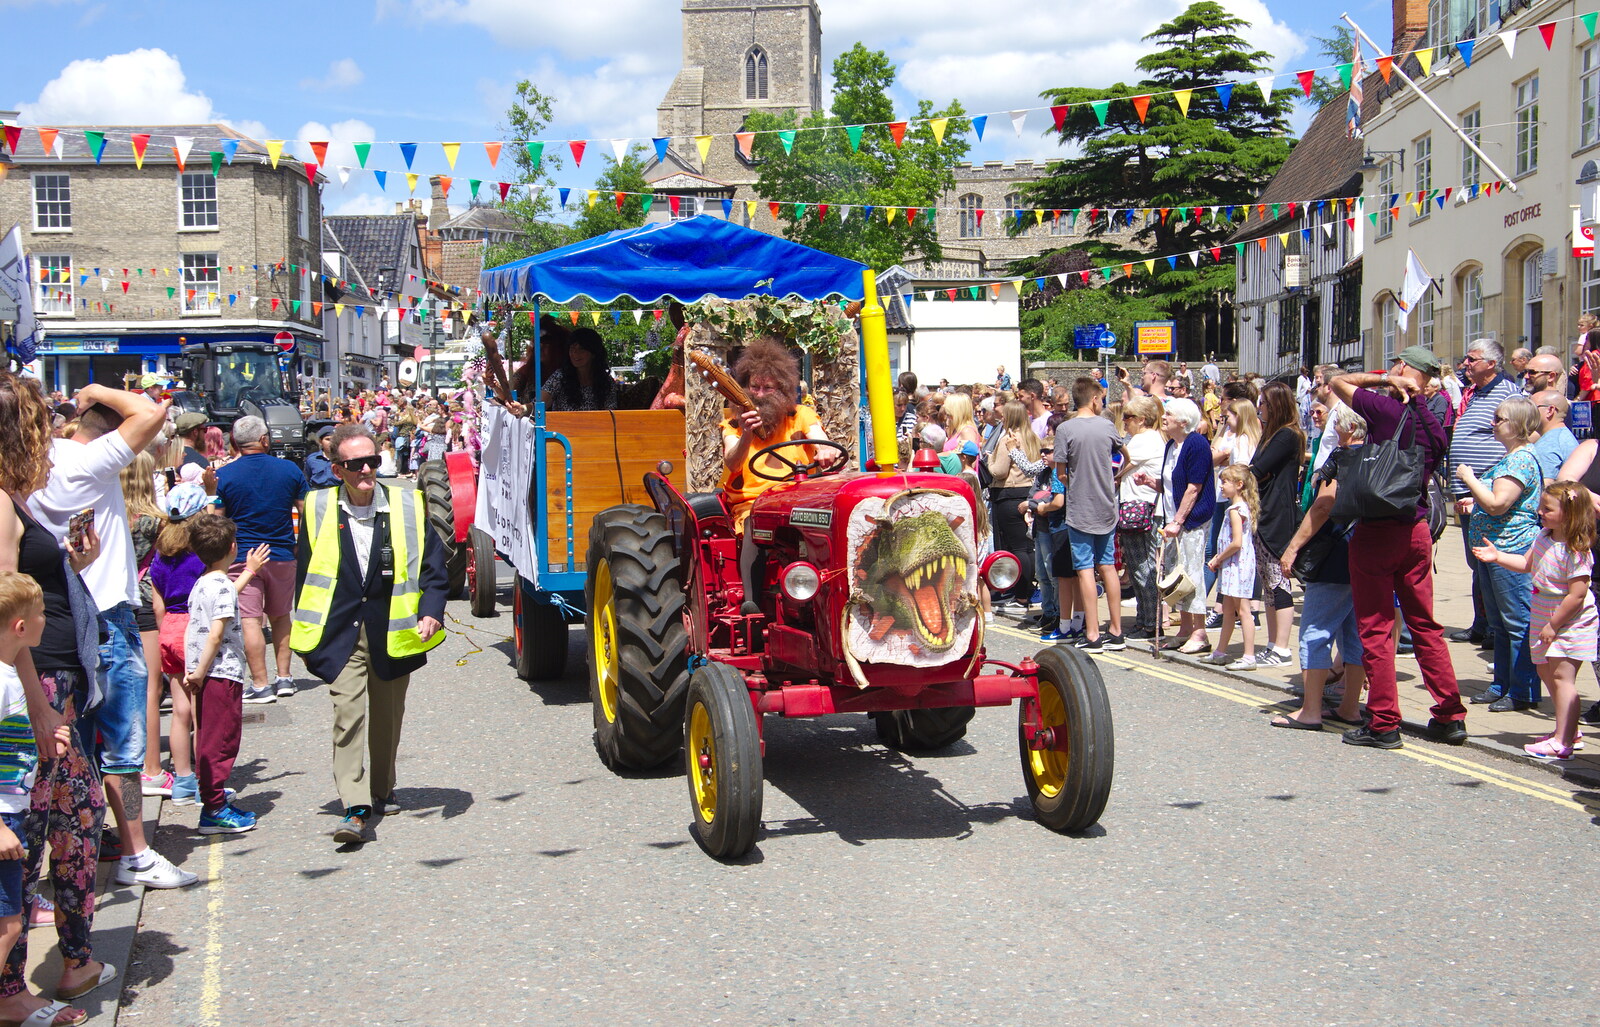 A vintage David Brown tractor from The Diss Carnival 2019, Diss, Norfolk - 9th June 2019